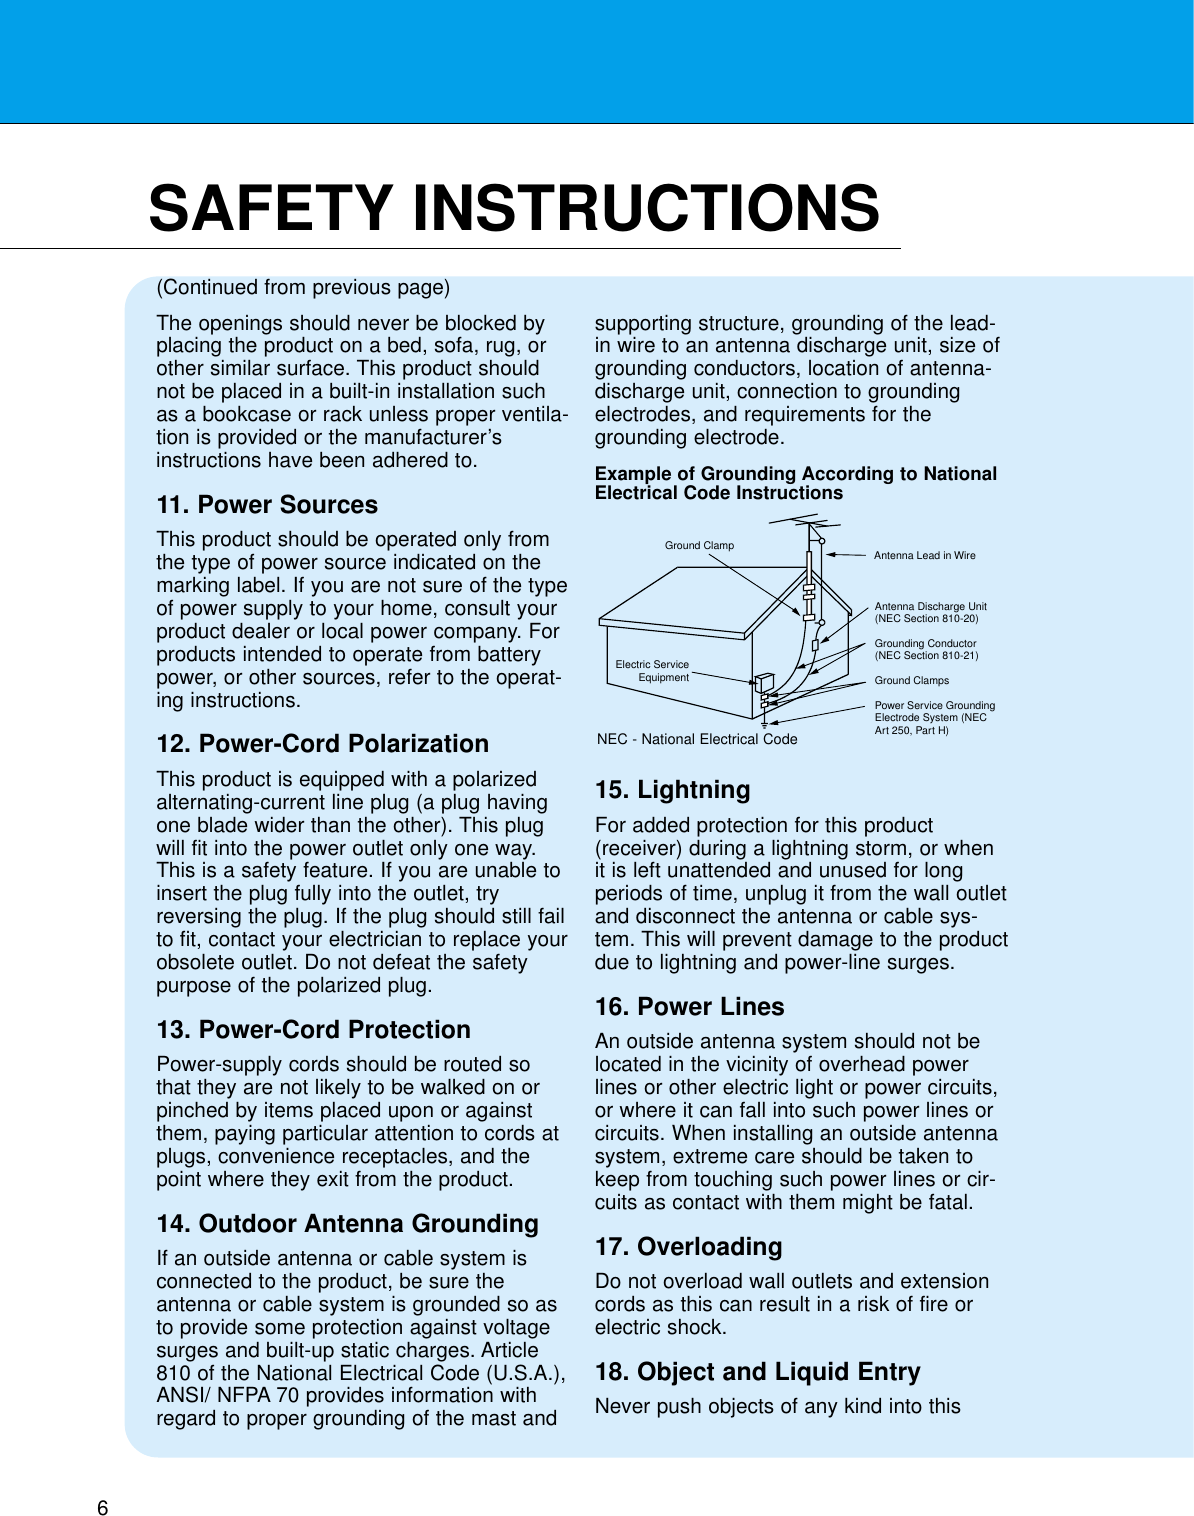 6SAFETY INSTRUCTIONSThe openings should never be blocked byplacing the product on a bed, sofa, rug, orother similar surface. This product shouldnot be placed in a built-in installation suchas a bookcase or rack unless proper ventila-tion is provided or the manufacturer’sinstructions have been adhered to.11. Power SourcesThis product should be operated only fromthe type of power source indicated on themarking label. If you are not sure of the typeof power supply to your home, consult yourproduct dealer or local power company. Forproducts intended to operate from batterypower, or other sources, refer to the operat-ing instructions.12. Power-Cord PolarizationThis product is equipped with a polarizedalternating-current line plug (a plug havingone blade wider than the other). This plugwill fit into the power outlet only one way.This is a safety feature. If you are unable toinsert the plug fully into the outlet, tryreversing the plug. If the plug should still failto fit, contact your electrician to replace yourobsolete outlet. Do not defeat the safetypurpose of the polarized plug.13. Power-Cord ProtectionPower-supply cords should be routed sothat they are not likely to be walked on orpinched by items placed upon or againstthem, paying particular attention to cords atplugs, convenience receptacles, and thepoint where they exit from the product.14. Outdoor Antenna GroundingIf an outside antenna or cable system isconnected to the product, be sure theantenna or cable system is grounded so asto provide some protection against voltagesurges and built-up static charges. Article810 of the National Electrical Code (U.S.A.),ANSI/ NFPA 70 provides information withregard to proper grounding of the mast andsupporting structure, grounding of the lead-in wire to an antenna discharge unit, size ofgrounding conductors, location of antenna-discharge unit, connection to groundingelectrodes, and requirements for thegrounding electrode.15. LightningFor added protection for this product(receiver) during a lightning storm, or whenit is left unattended and unused for longperiods of time, unplug it from the wall outletand disconnect the antenna or cable sys-tem. This will prevent damage to the productdue to lightning and power-line surges.16. Power LinesAn outside antenna system should not belocated in the vicinity of overhead powerlines or other electric light or power circuits,or where it can fall into such power lines orcircuits. When installing an outside antennasystem, extreme care should be taken tokeep from touching such power lines or cir-cuits as contact with them might be fatal.17. OverloadingDo not overload wall outlets and extensioncords as this can result in a risk of fire orelectric shock.18. Object and Liquid EntryNever push objects of any kind into this(Continued from previous page)Antenna Lead in WireAntenna Discharge Unit(NEC Section 810-20)Grounding Conductor(NEC Section 810-21)Ground ClampsPower Service GroundingElectrode System (NECArt 250, Part H)Ground ClampElectric ServiceEquipmentExample of Grounding According to NationalElectrical Code InstructionsNEC - National Electrical Code